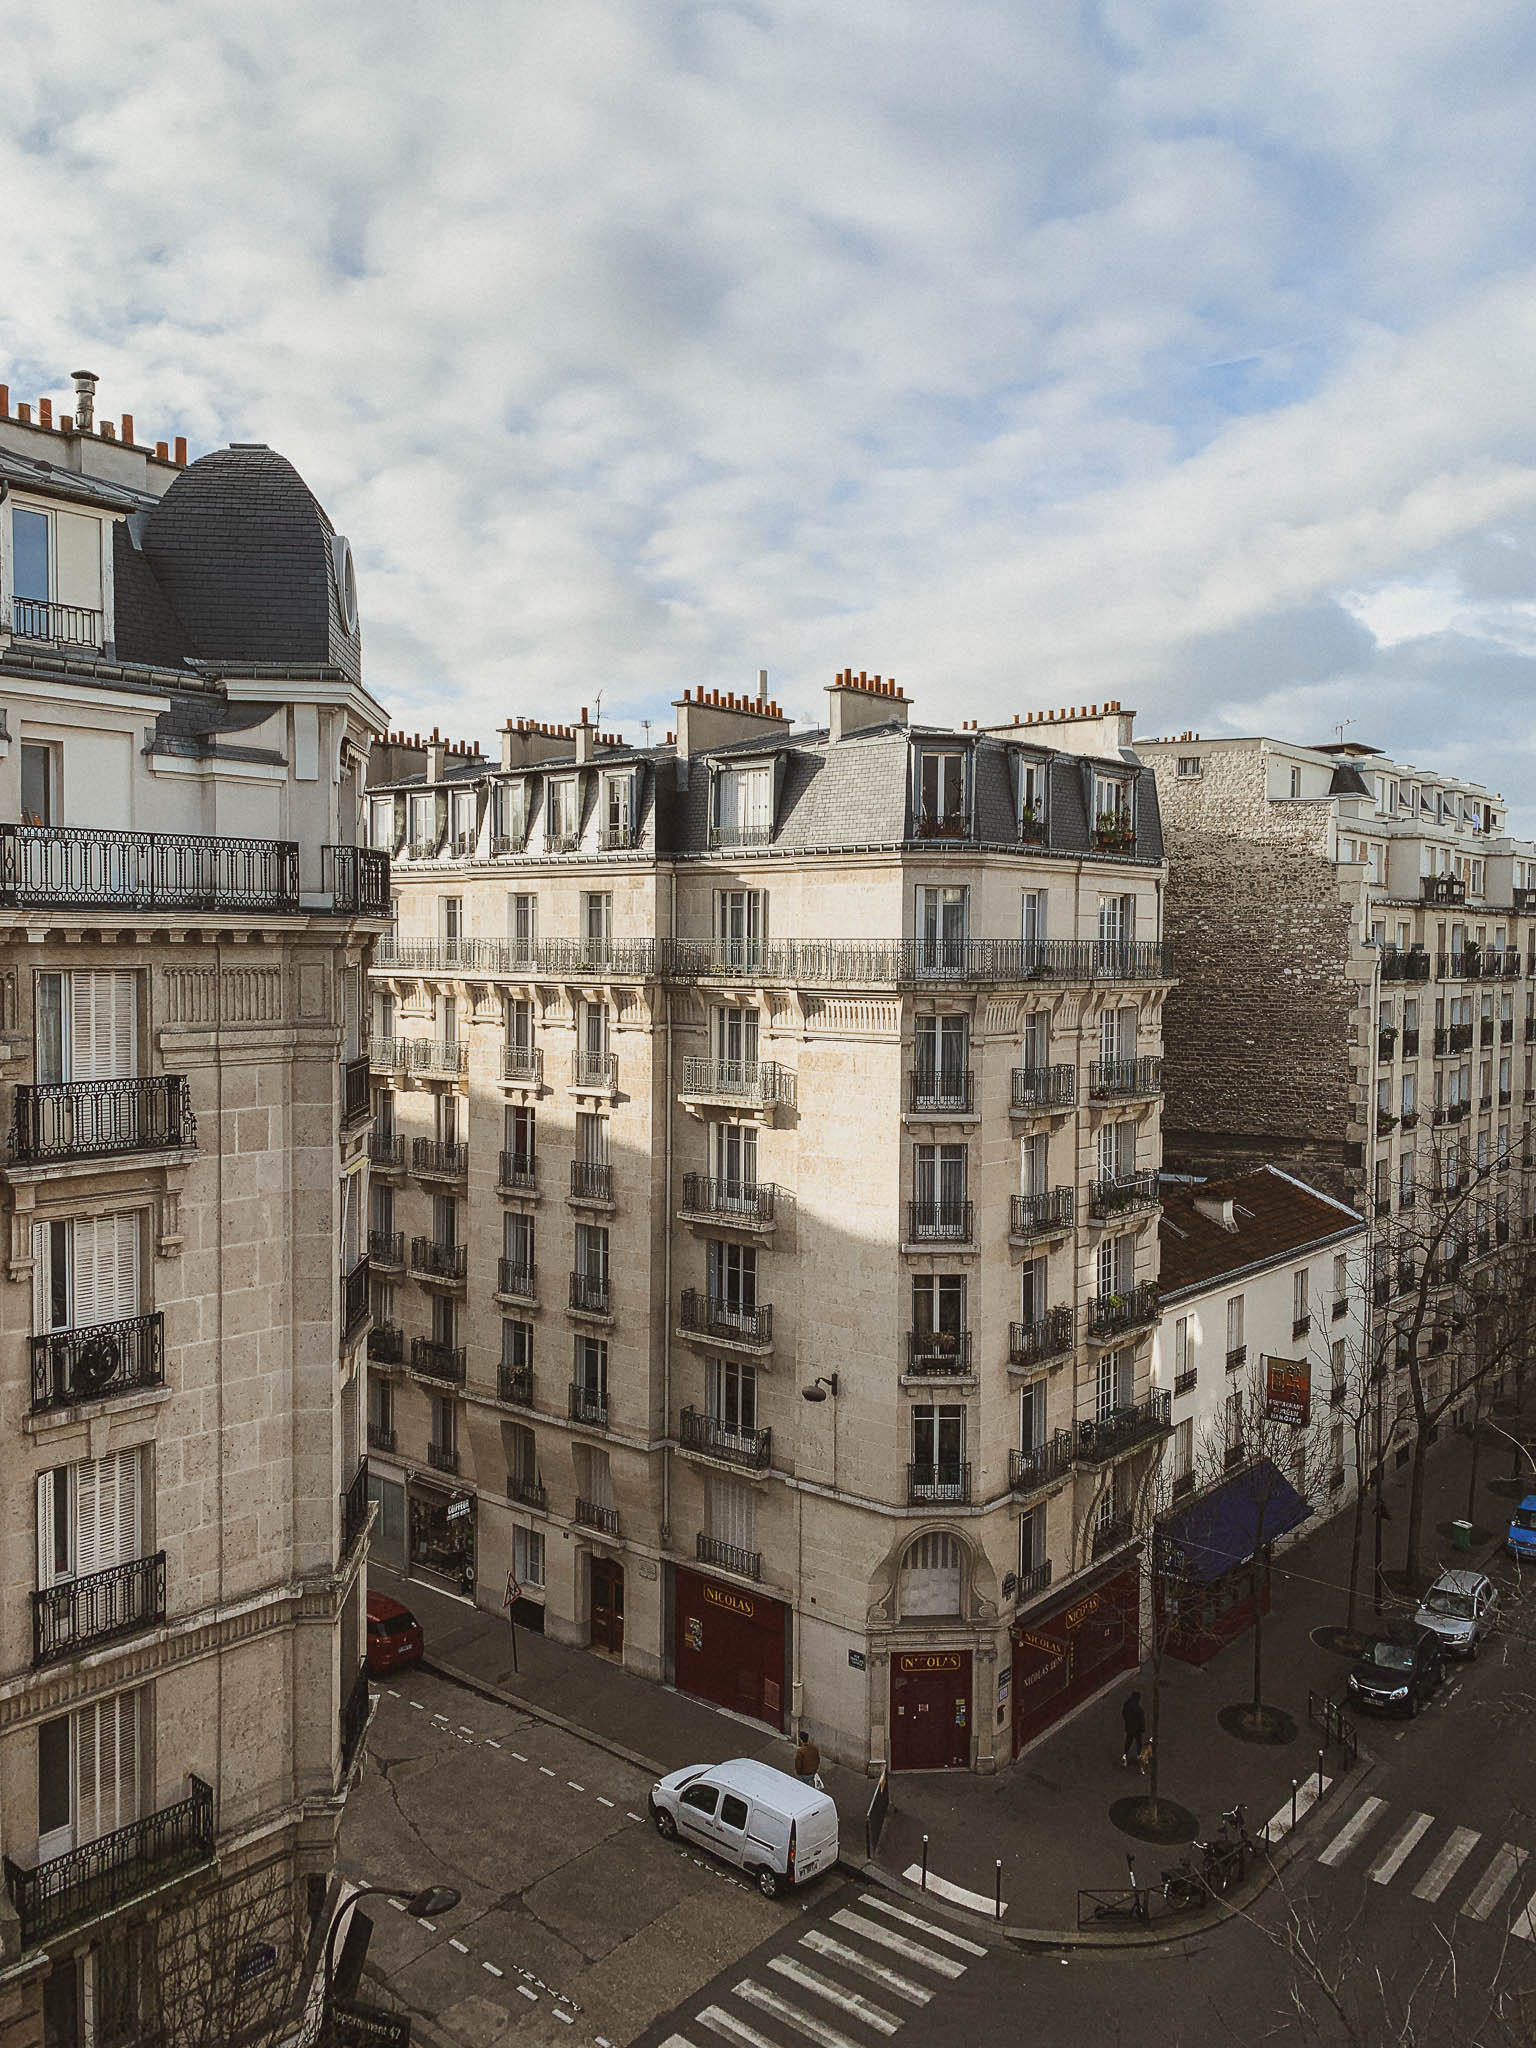 typical Paris buildings and local neighborhoods outside city center